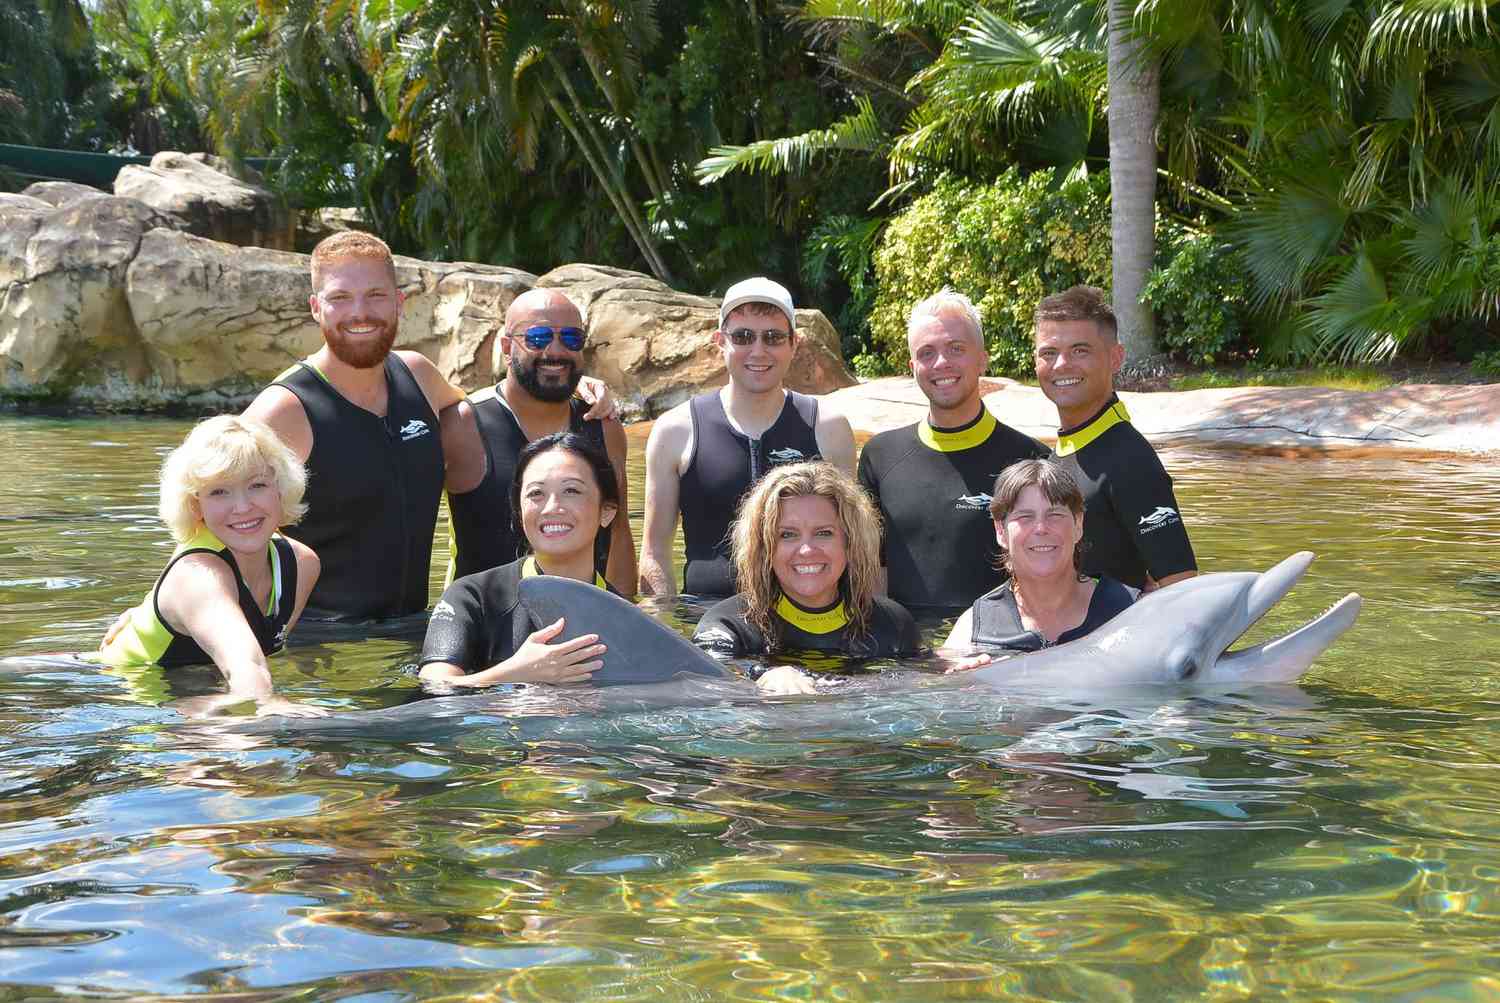 Discoverycove